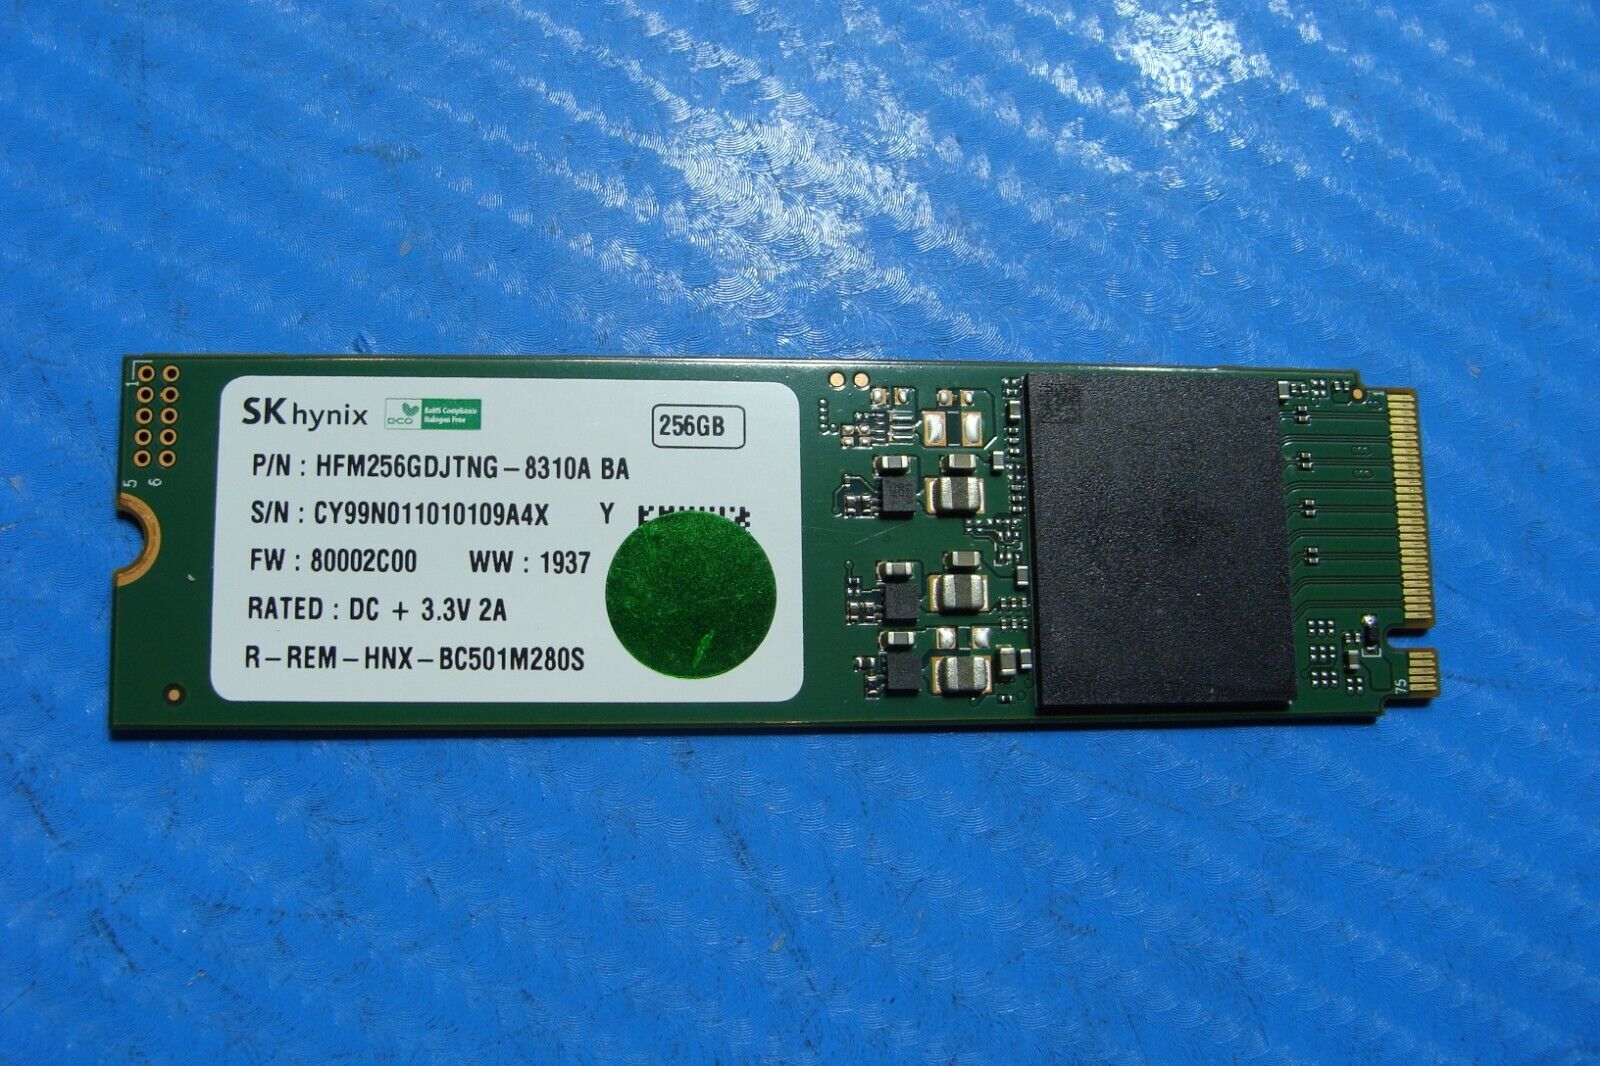 Acer AN515-43-R0YM SK Hynix 256Gb NVMe M.2 Solid State Drive HFM256GDJTNG-8310A